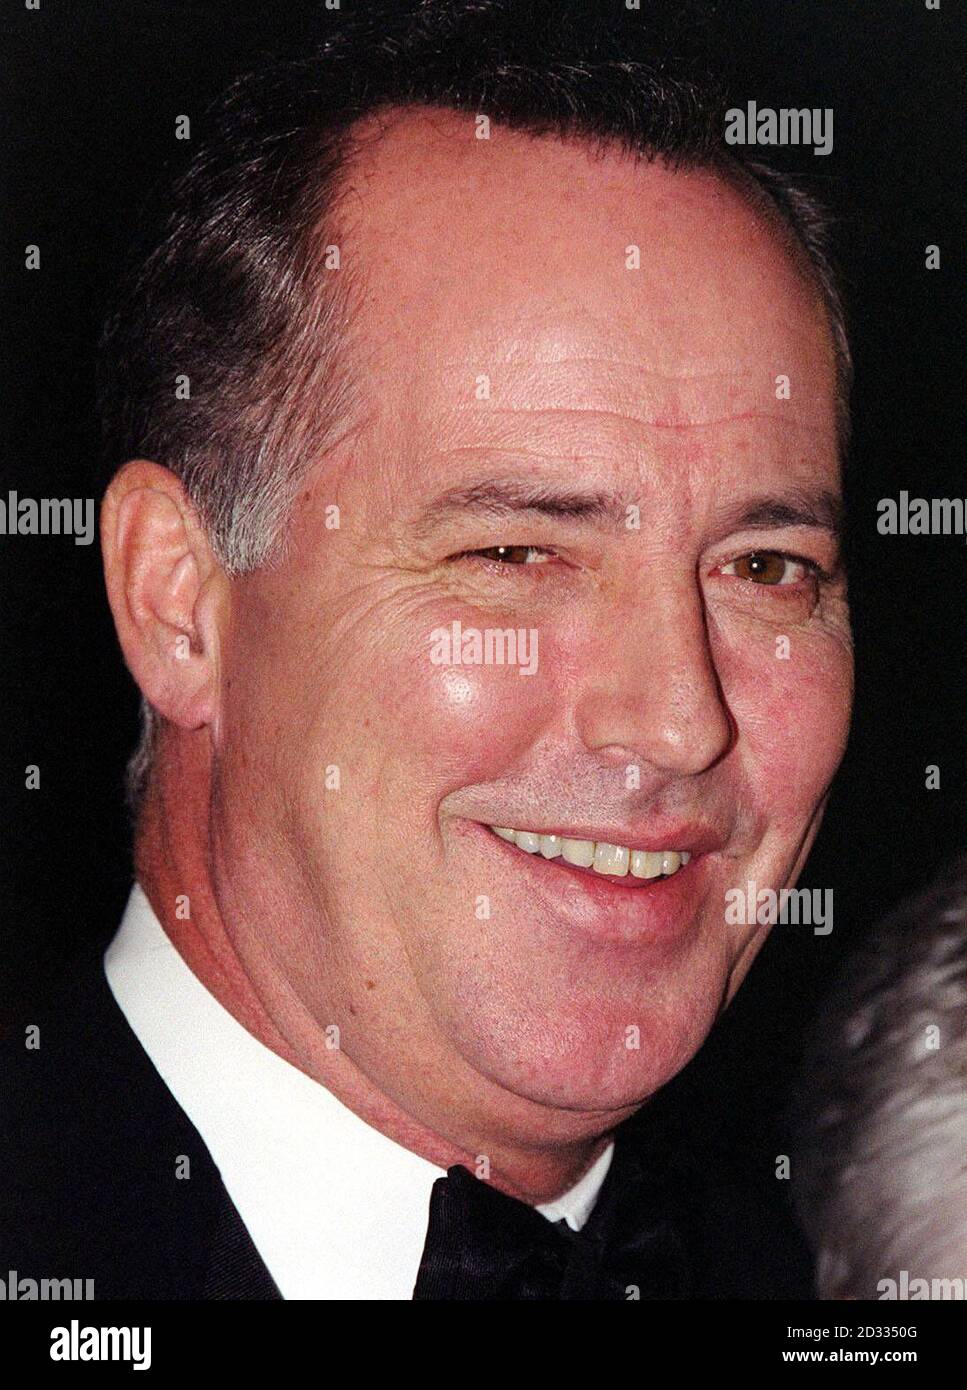 PA library file dated 10/10/2000 of TV presenter and comedian Michael Barrymore who was talking about his fall from grace and the prospects of revitalising his onscreen career at a major broadcasting event. The star - dropped by ITV in 2002 - was speaking about his experiences to an audience of TV executives at the MediaGuardian Edinburgh International Television Festival.   Stock Photo